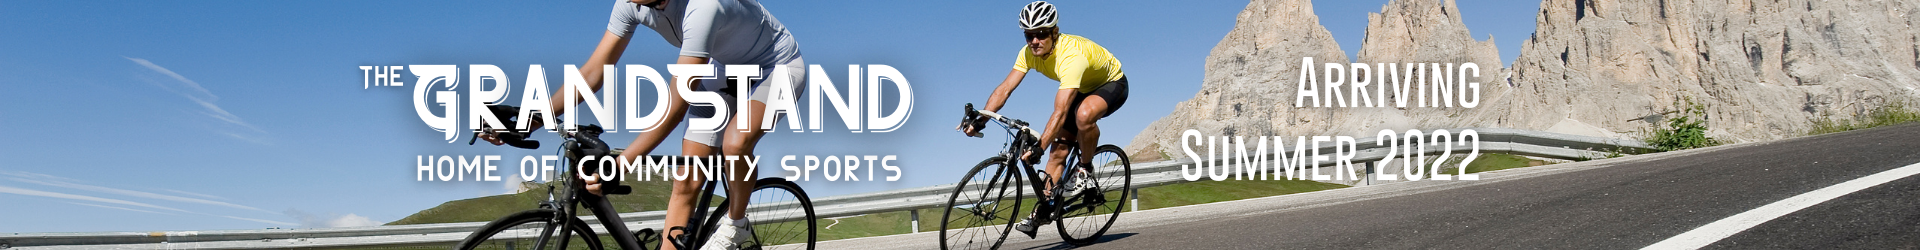 Grandstand Header - Cycling - 1 - 1920x250px